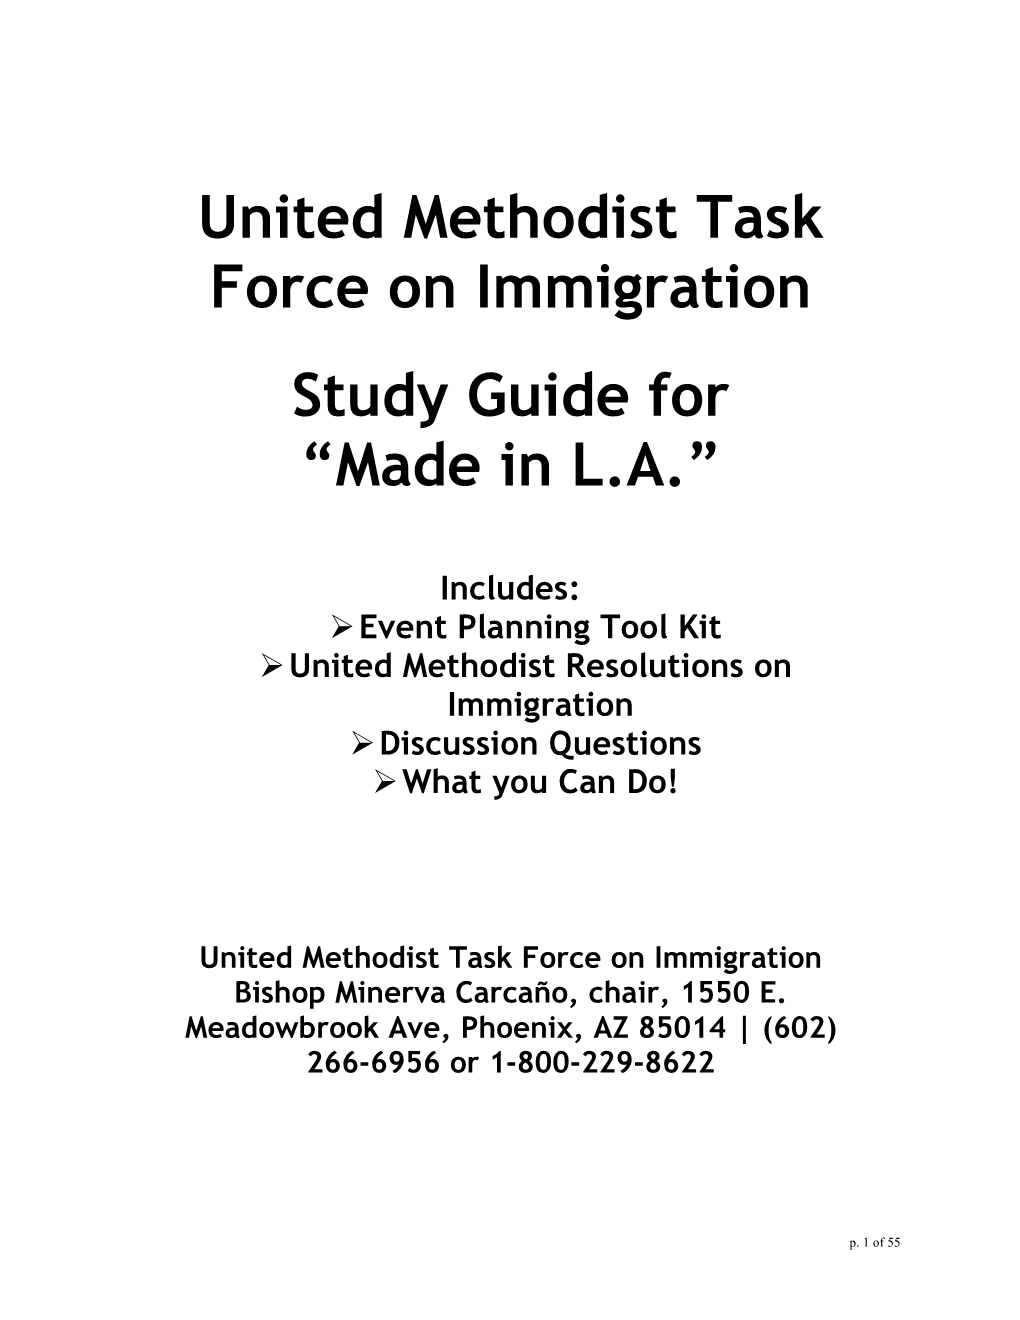 Made in L.A. Study Guide